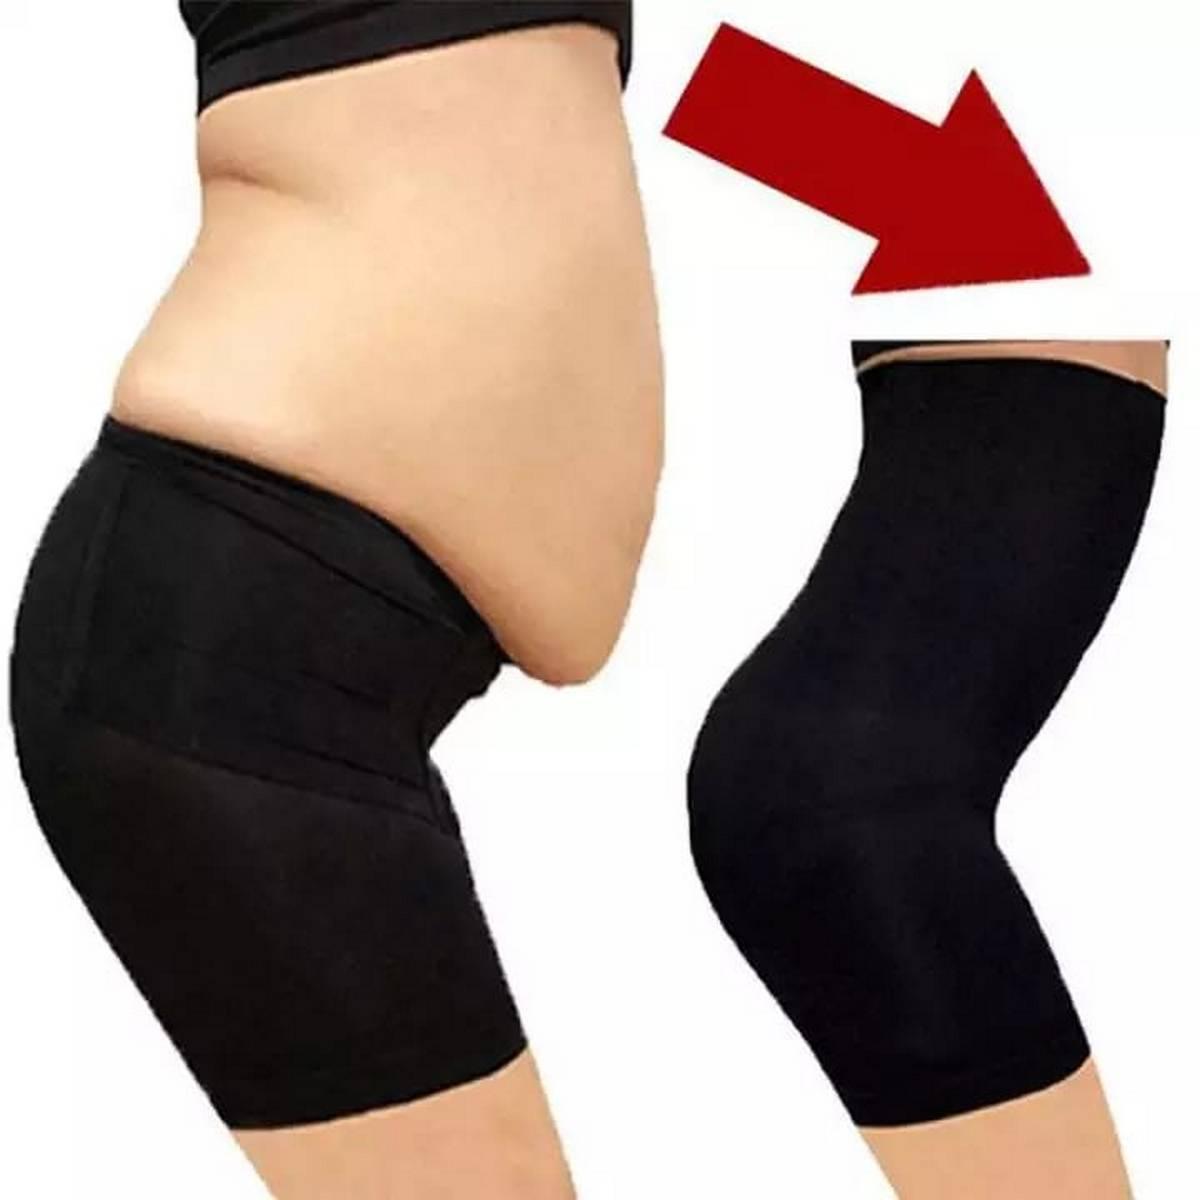 Extreme Tummy Control Shapewear Best Girdle to Hold in Stomach Plus Size Best Shapewear for Lower Belly Pooch